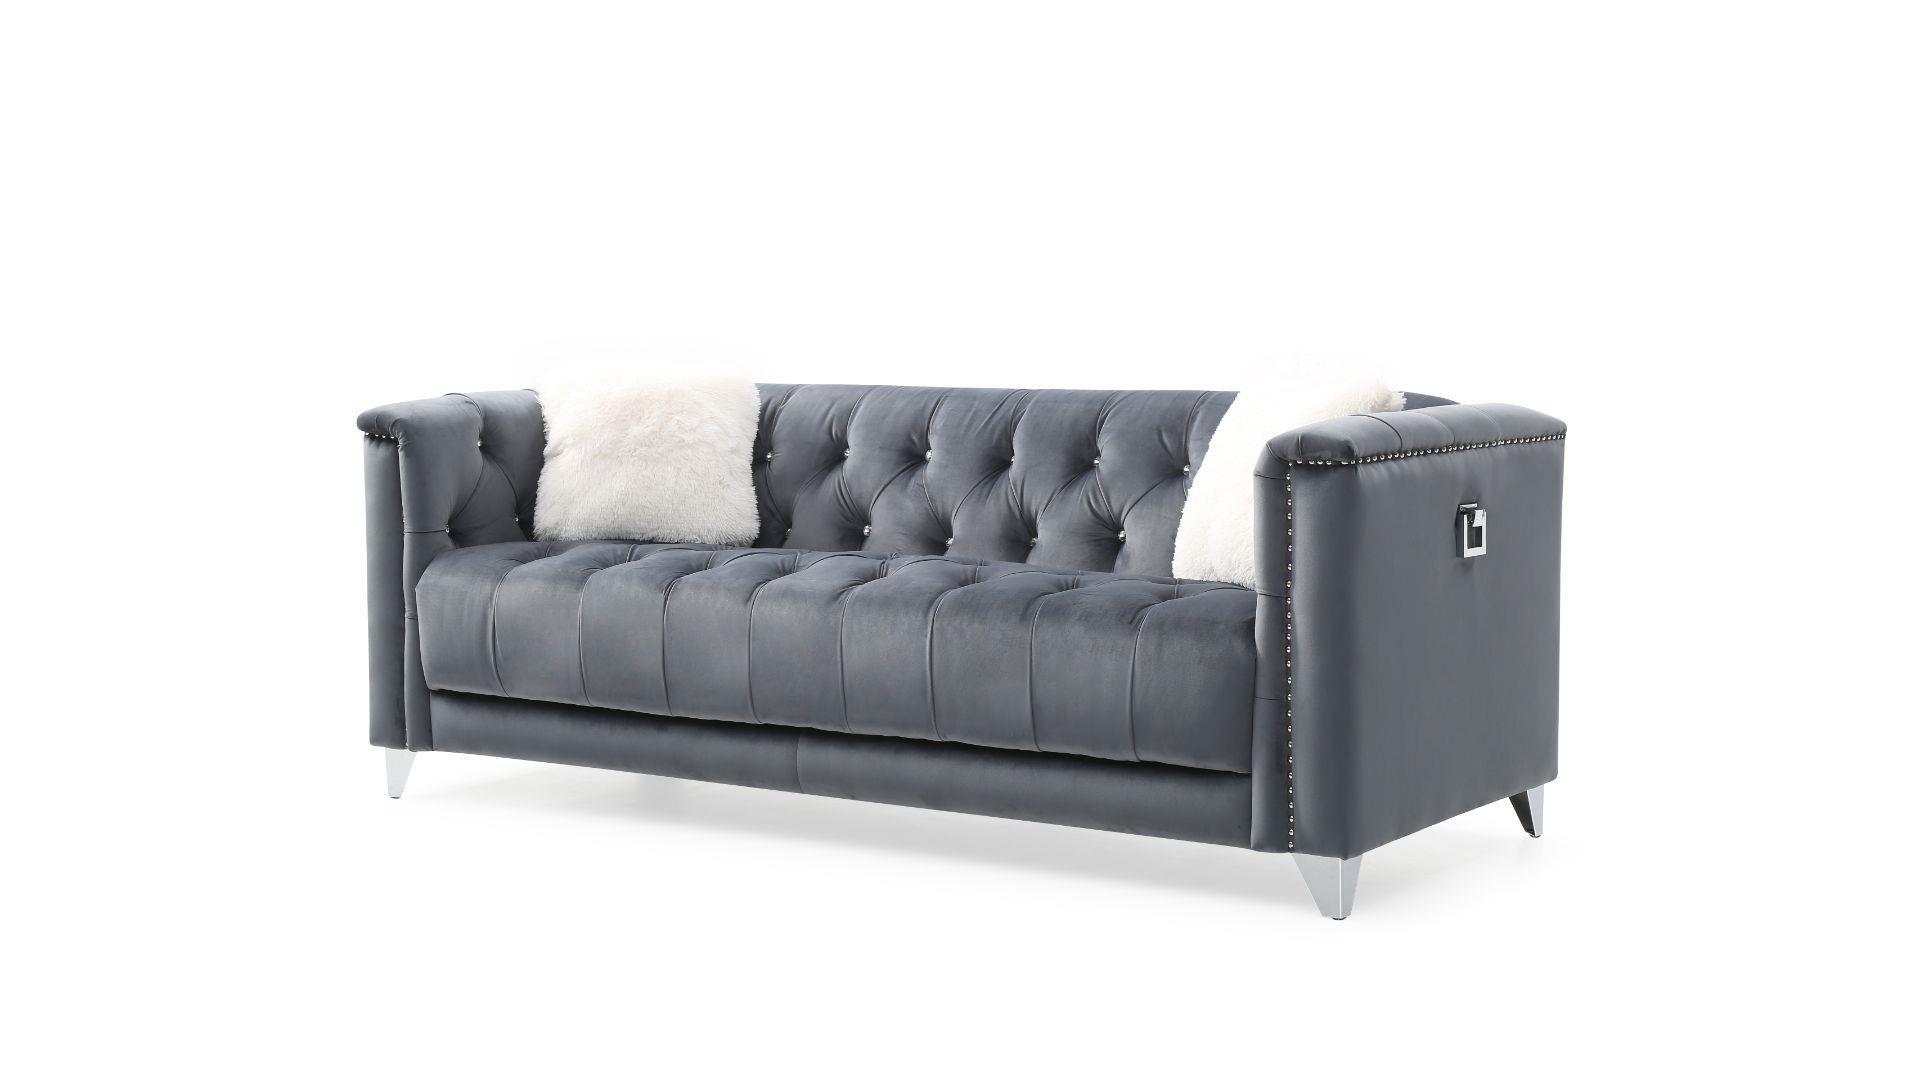 Contemporary, Modern Sofa RUSSELL GRAY RUSSELL-GR-S in Gray Fabric